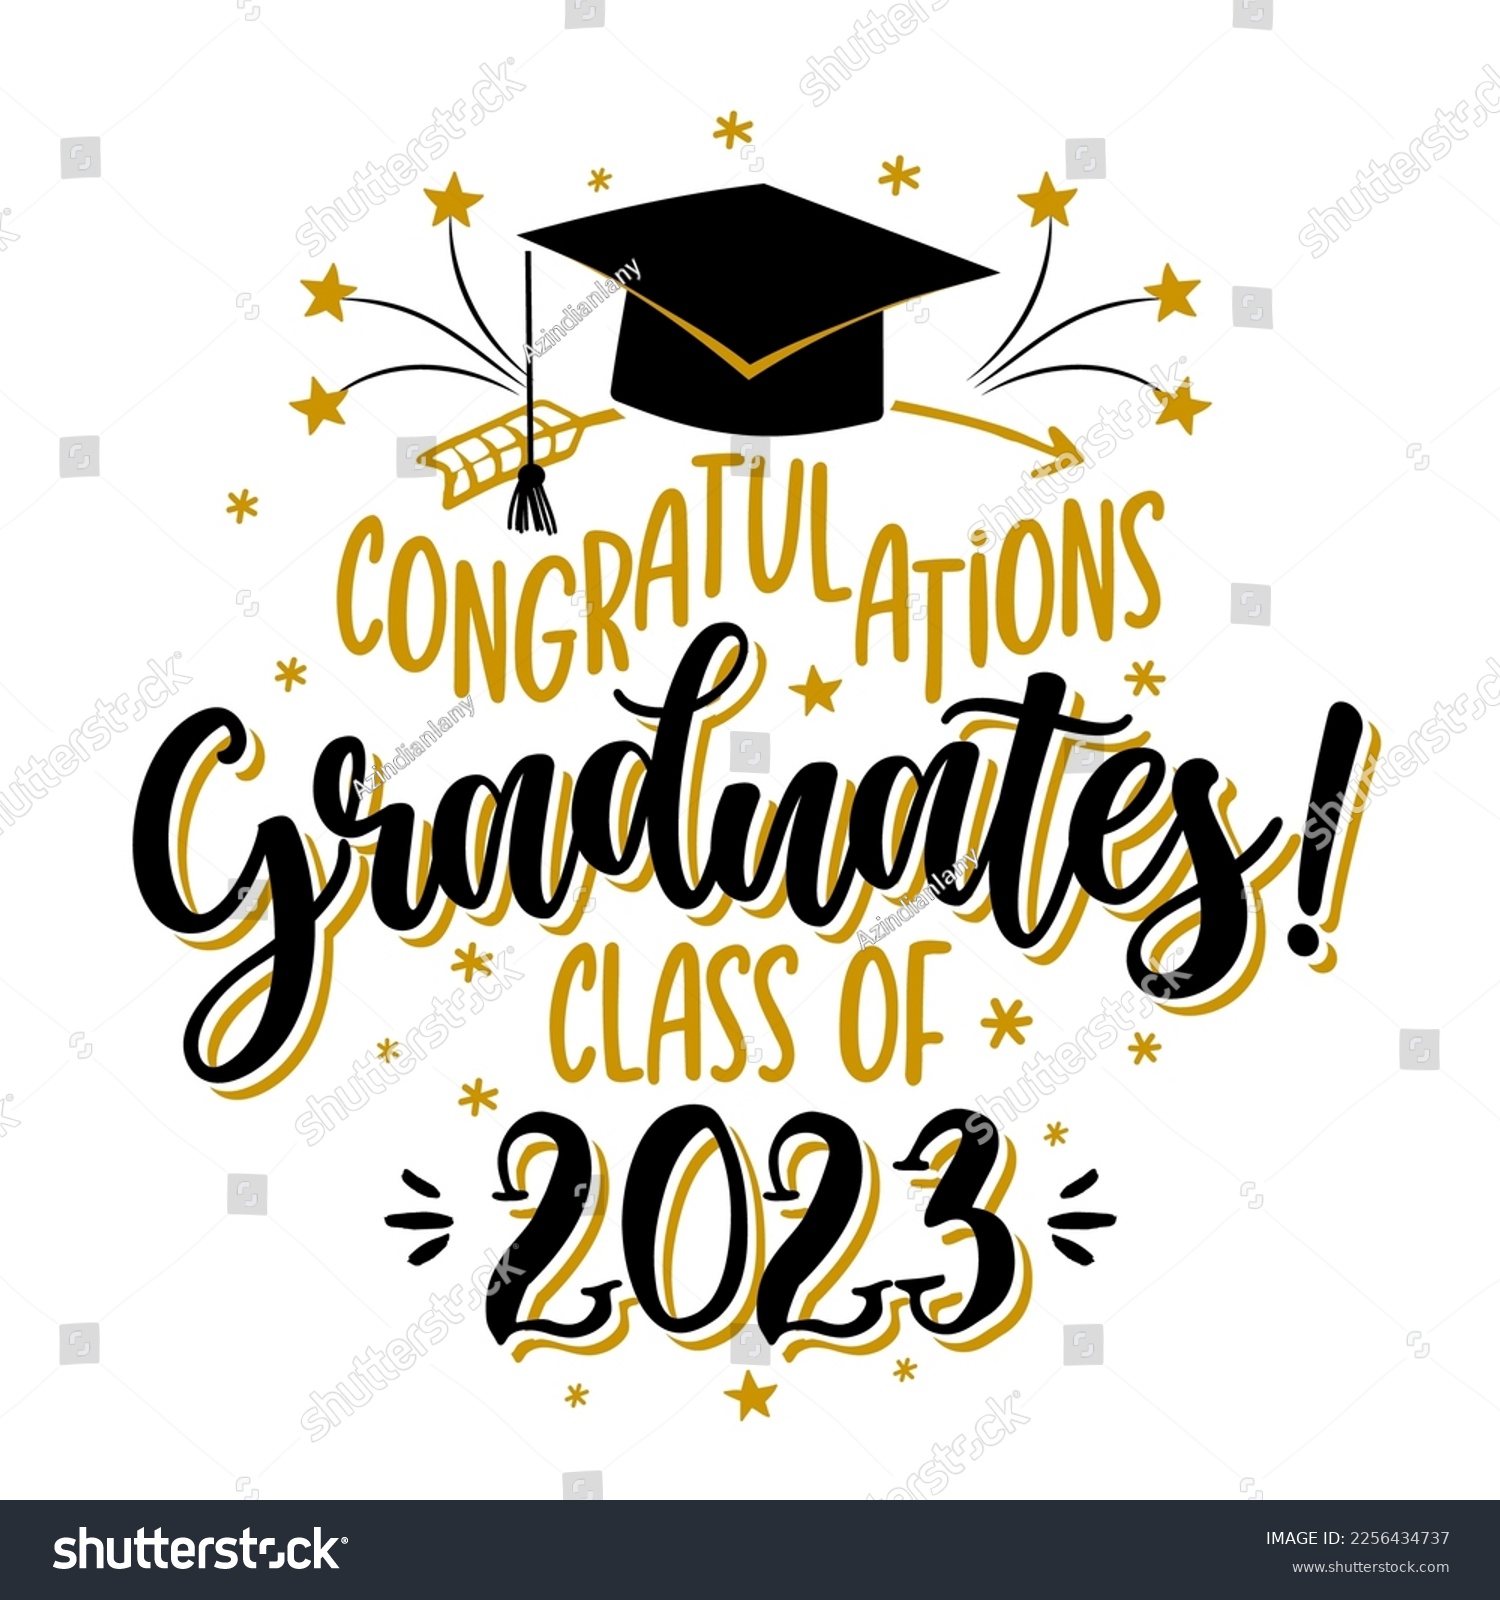 SVG of Congratulations Graduates Class of 2023 - badge design template in black and gold colors. Congratulations graduates 2023 banner sticker card with academic hat for high school or college graduation svg